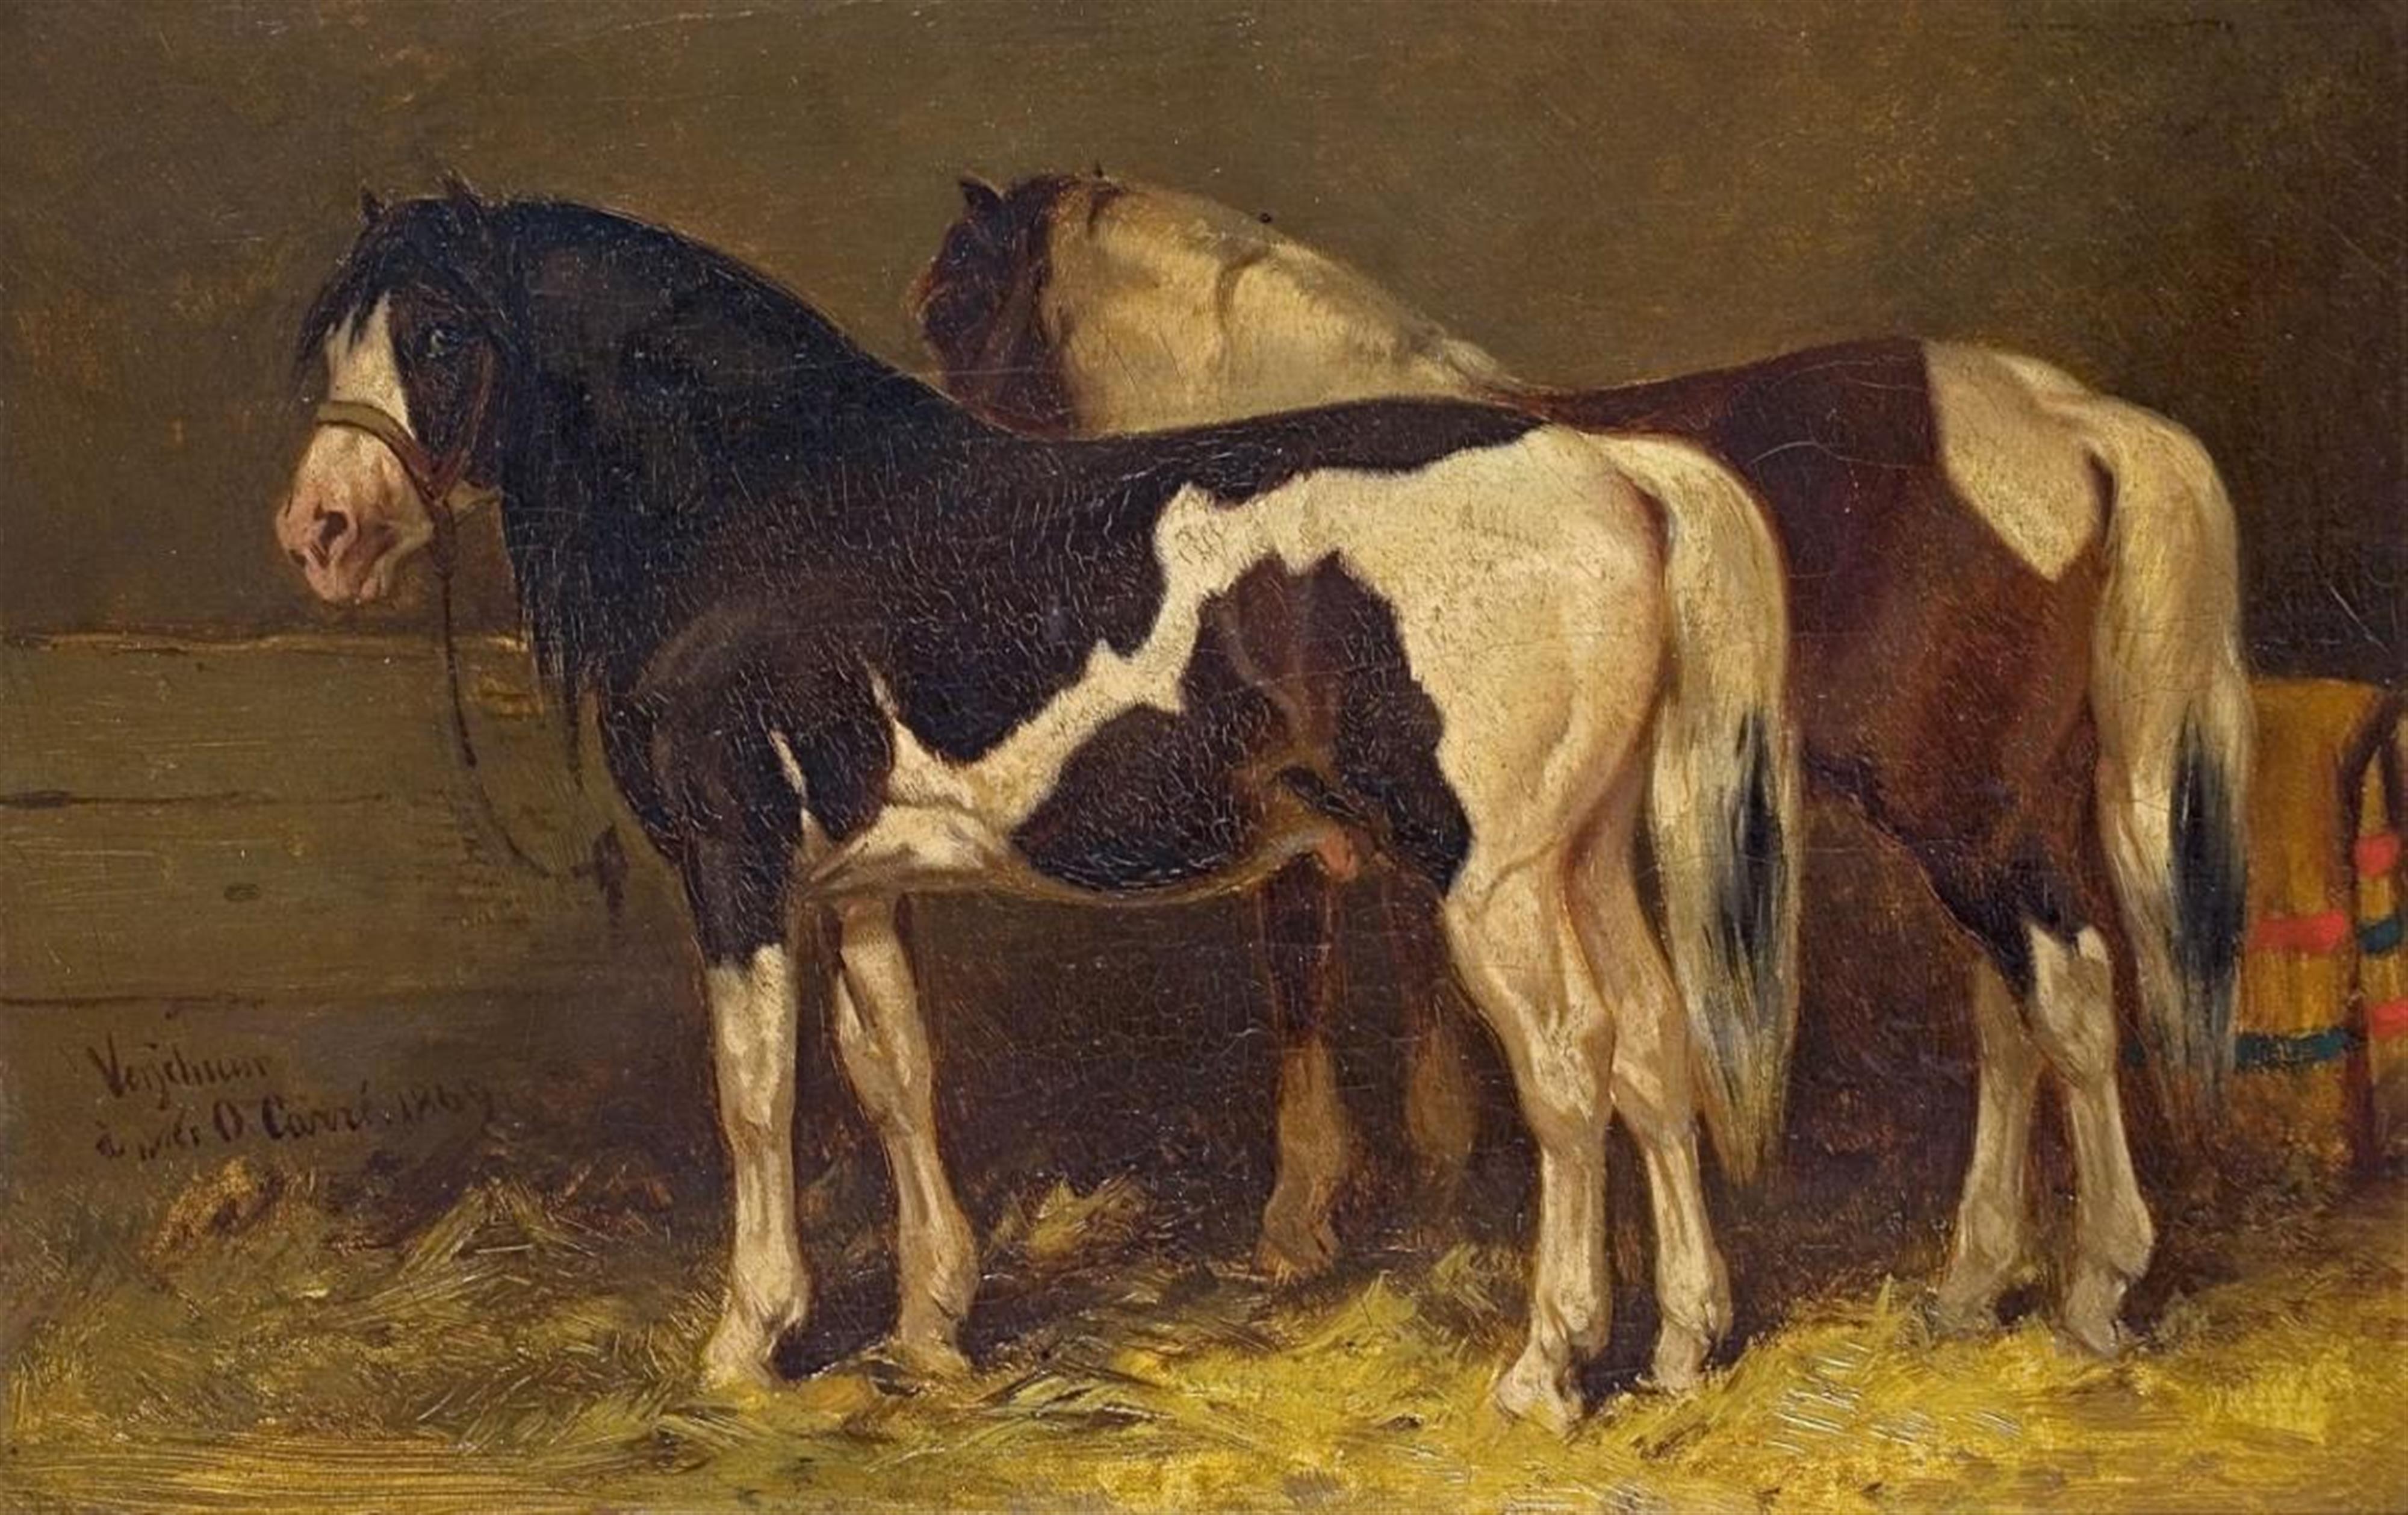 Wouter Verschuur the Younger - TWO HORSES IN A STABLE - image-1